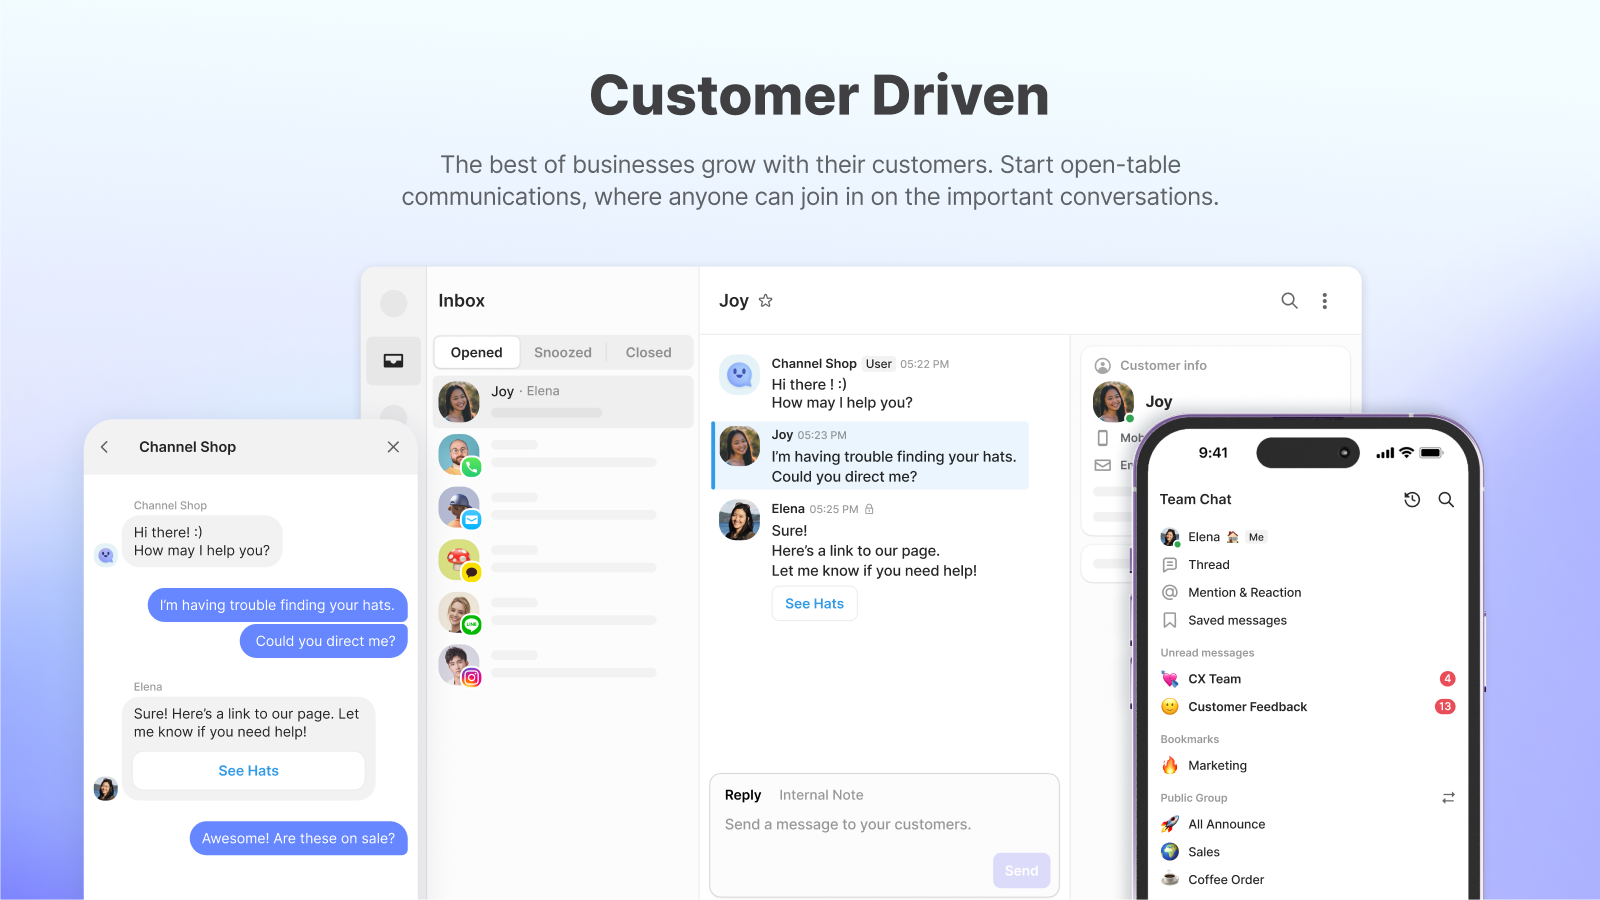 Customer Driven - open-table communication with customers